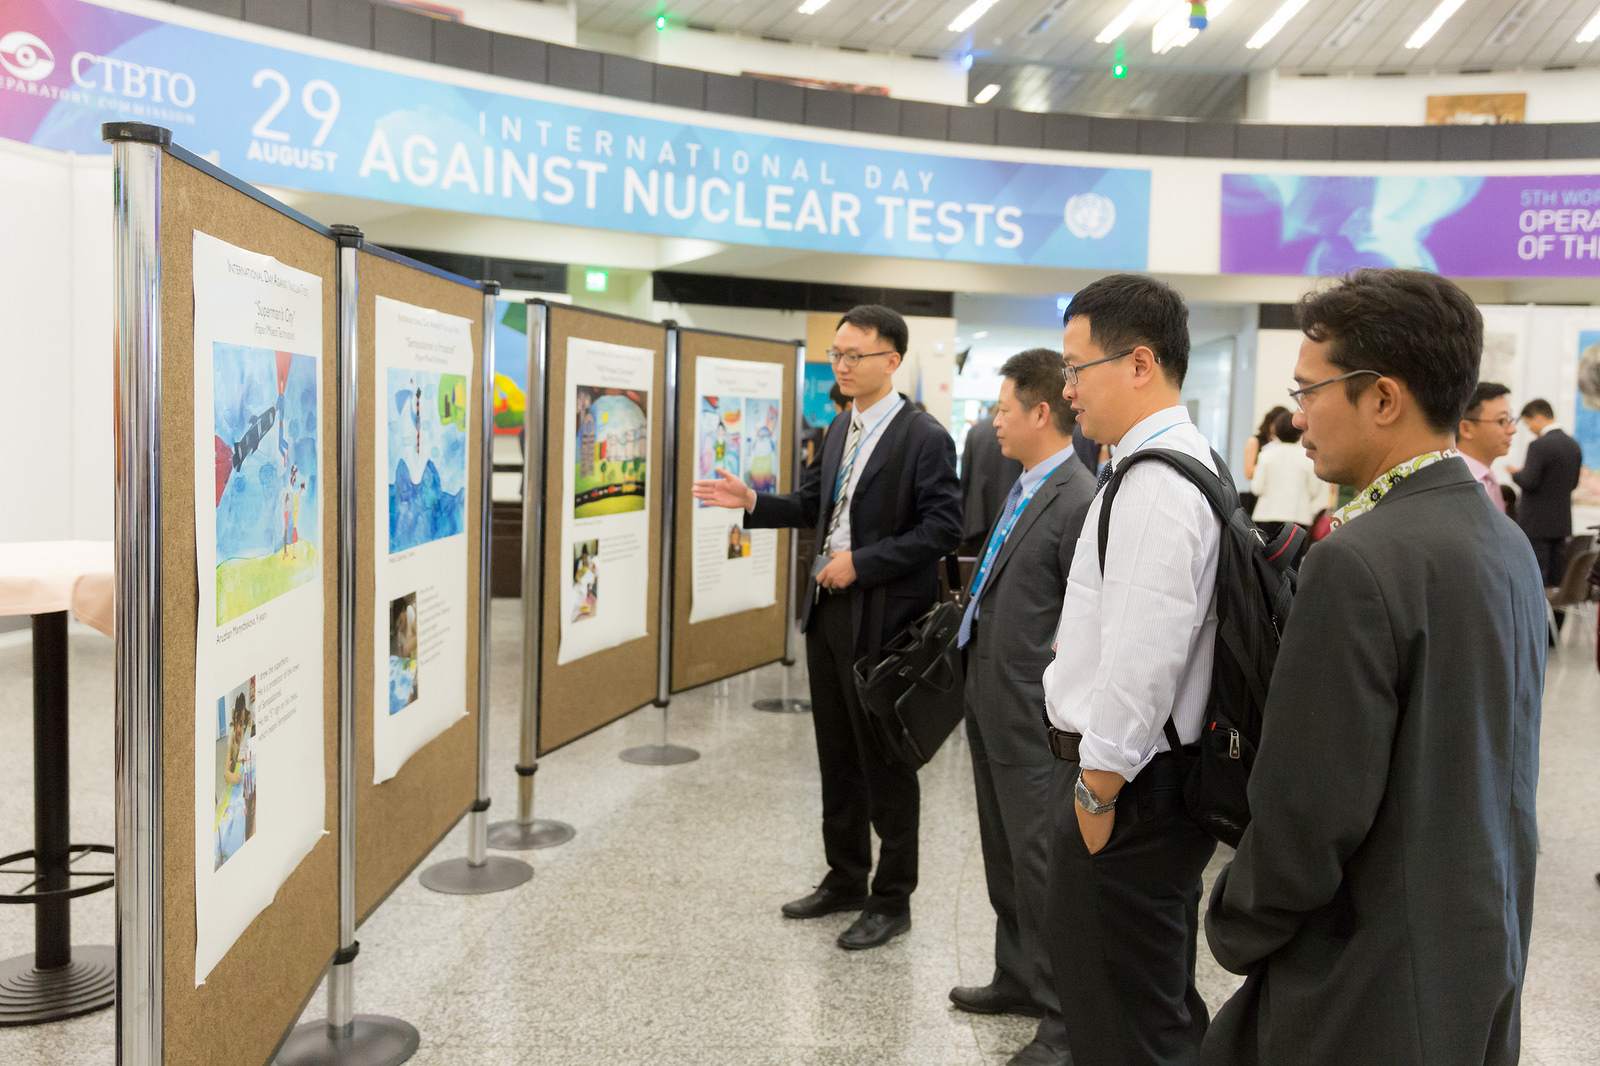 nuclear test6 International Day Against Nuclear Tests 2015